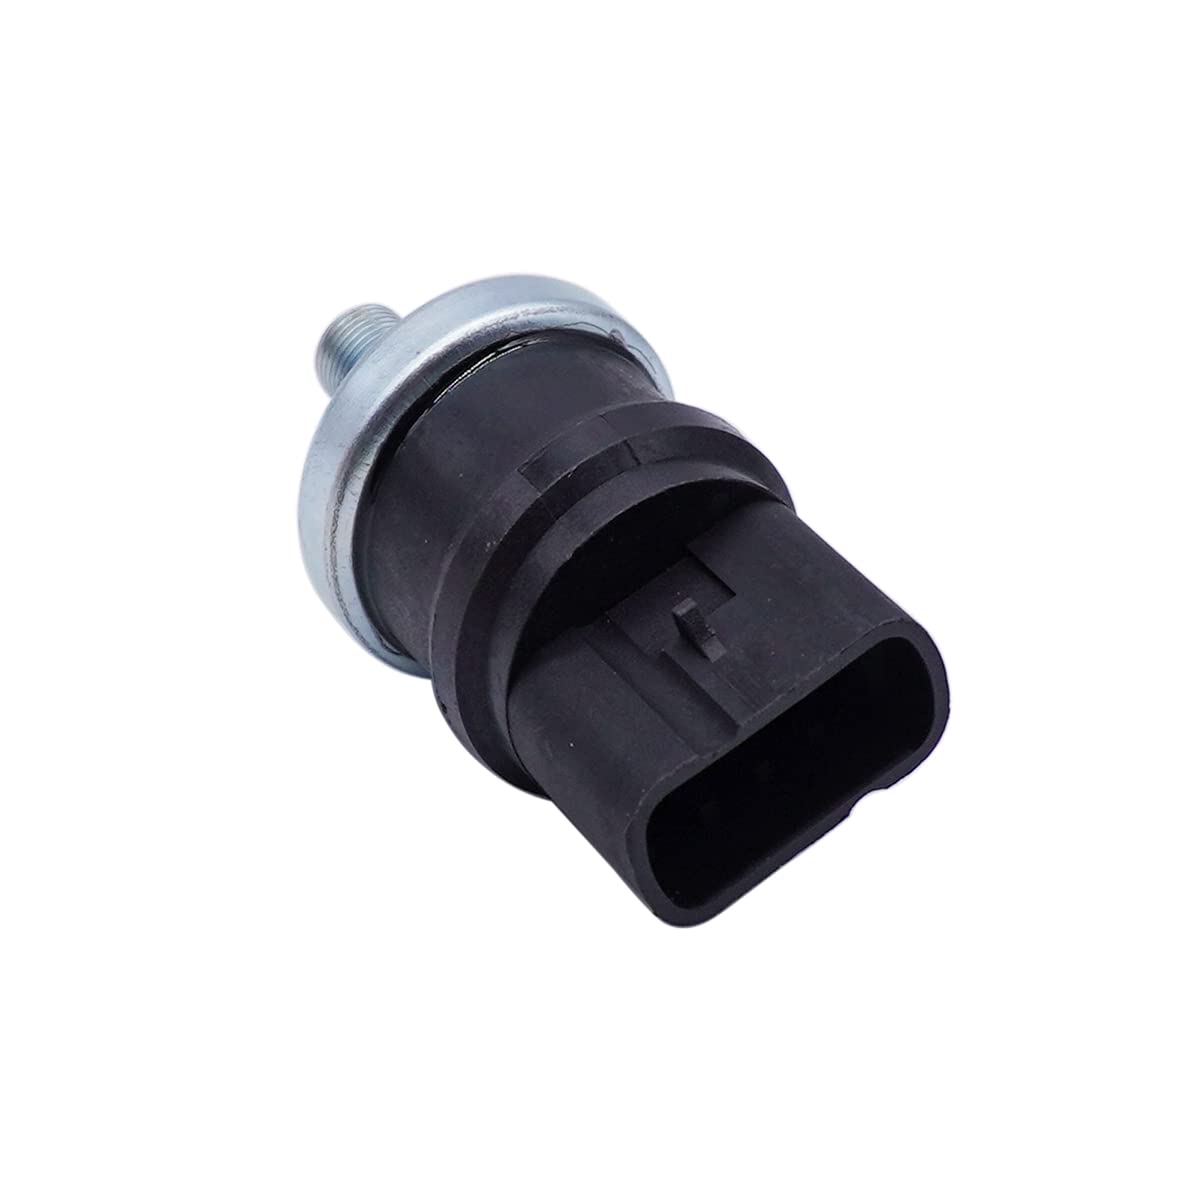 6670705 Hydraulic Oil Pressure Switch Compatible With Bobcat Skid Steer 453 463 553 653